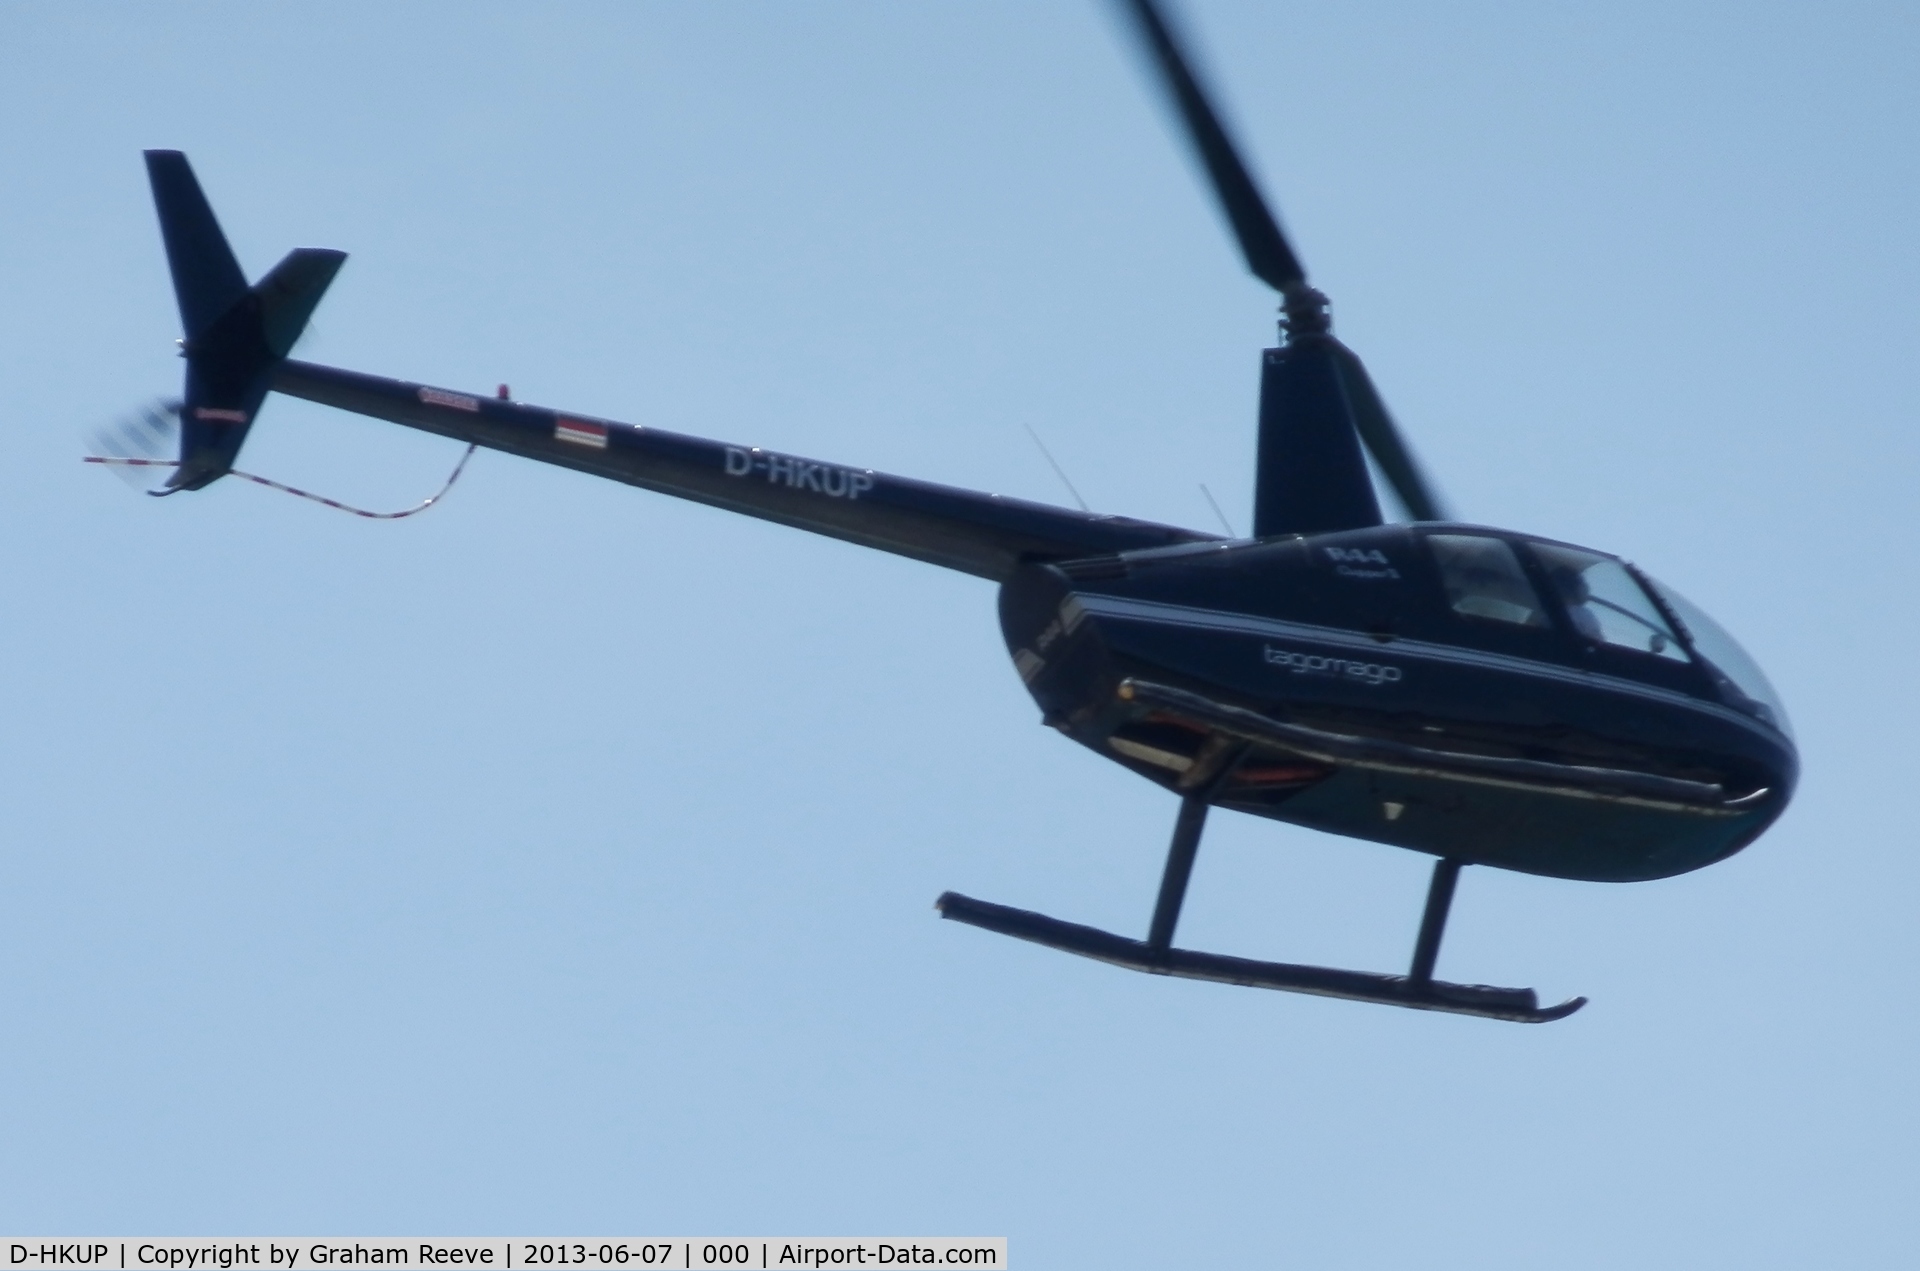 D-HKUP, Robinson R44 C/N 11450, Photograpged at a distance having just taken off at Camp de Mar, Majorca.